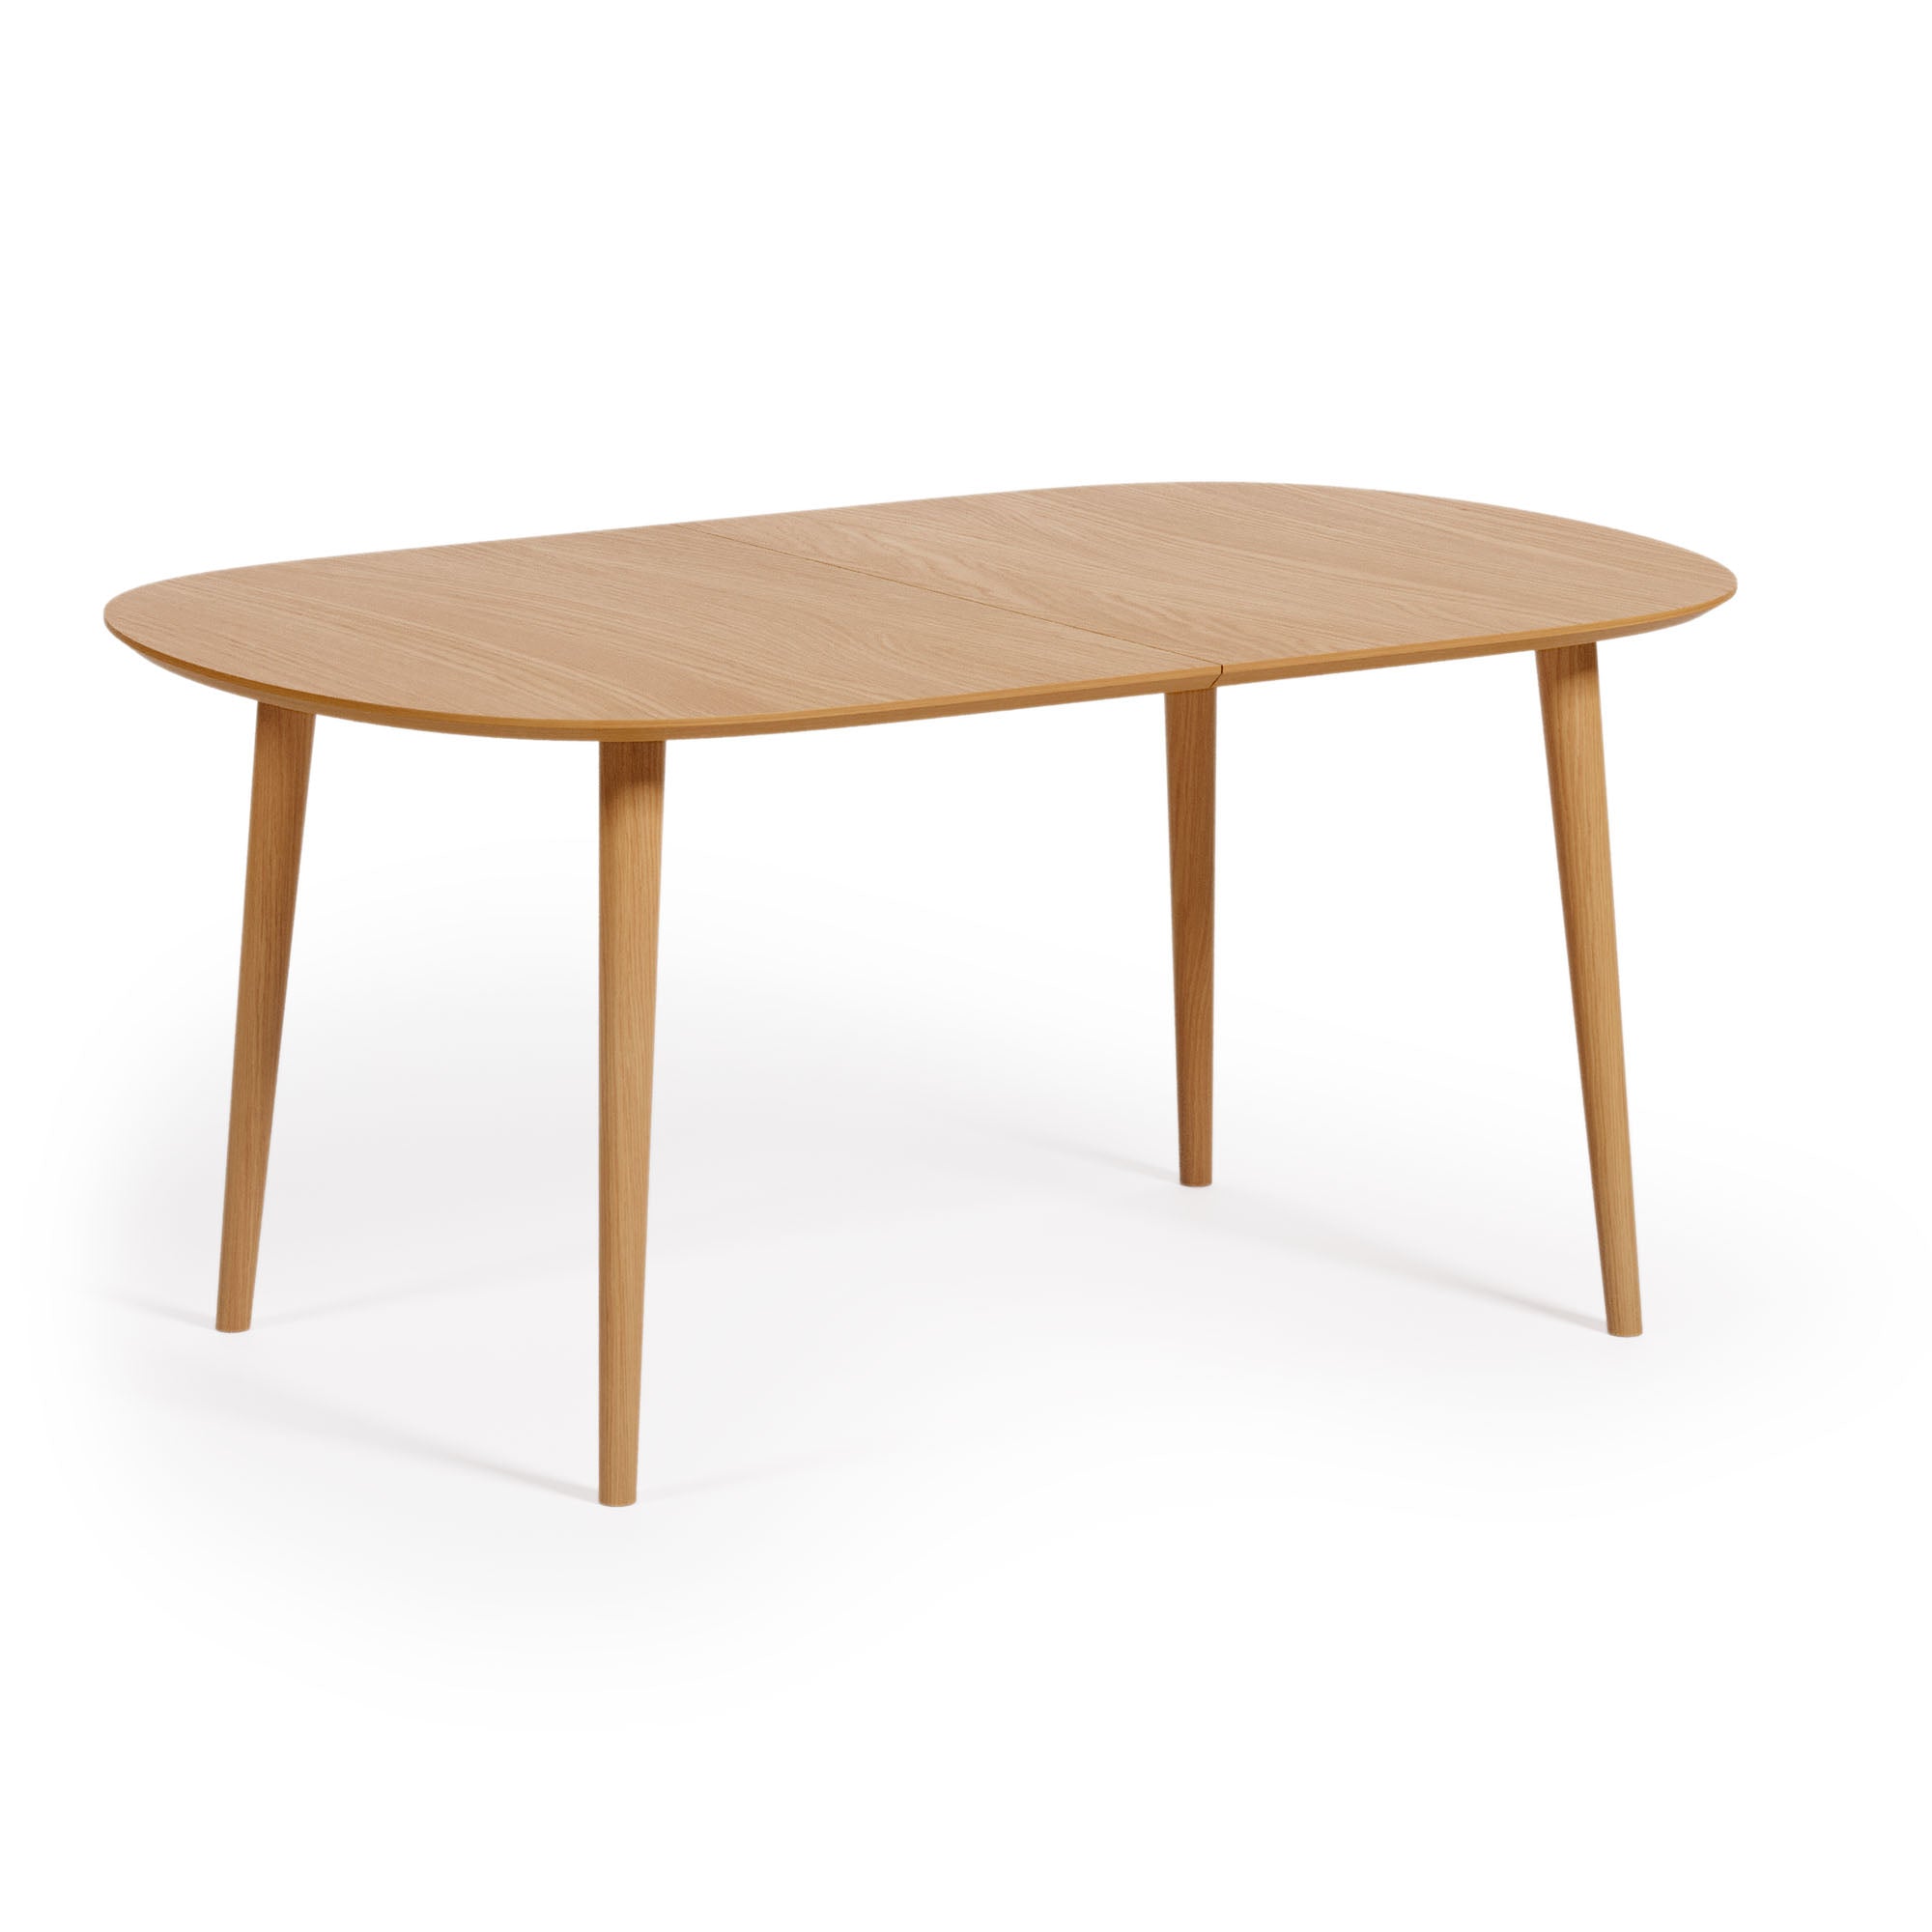 Oqui extendable oak veneer table with solid wood legs 160 (260) x 100 cm